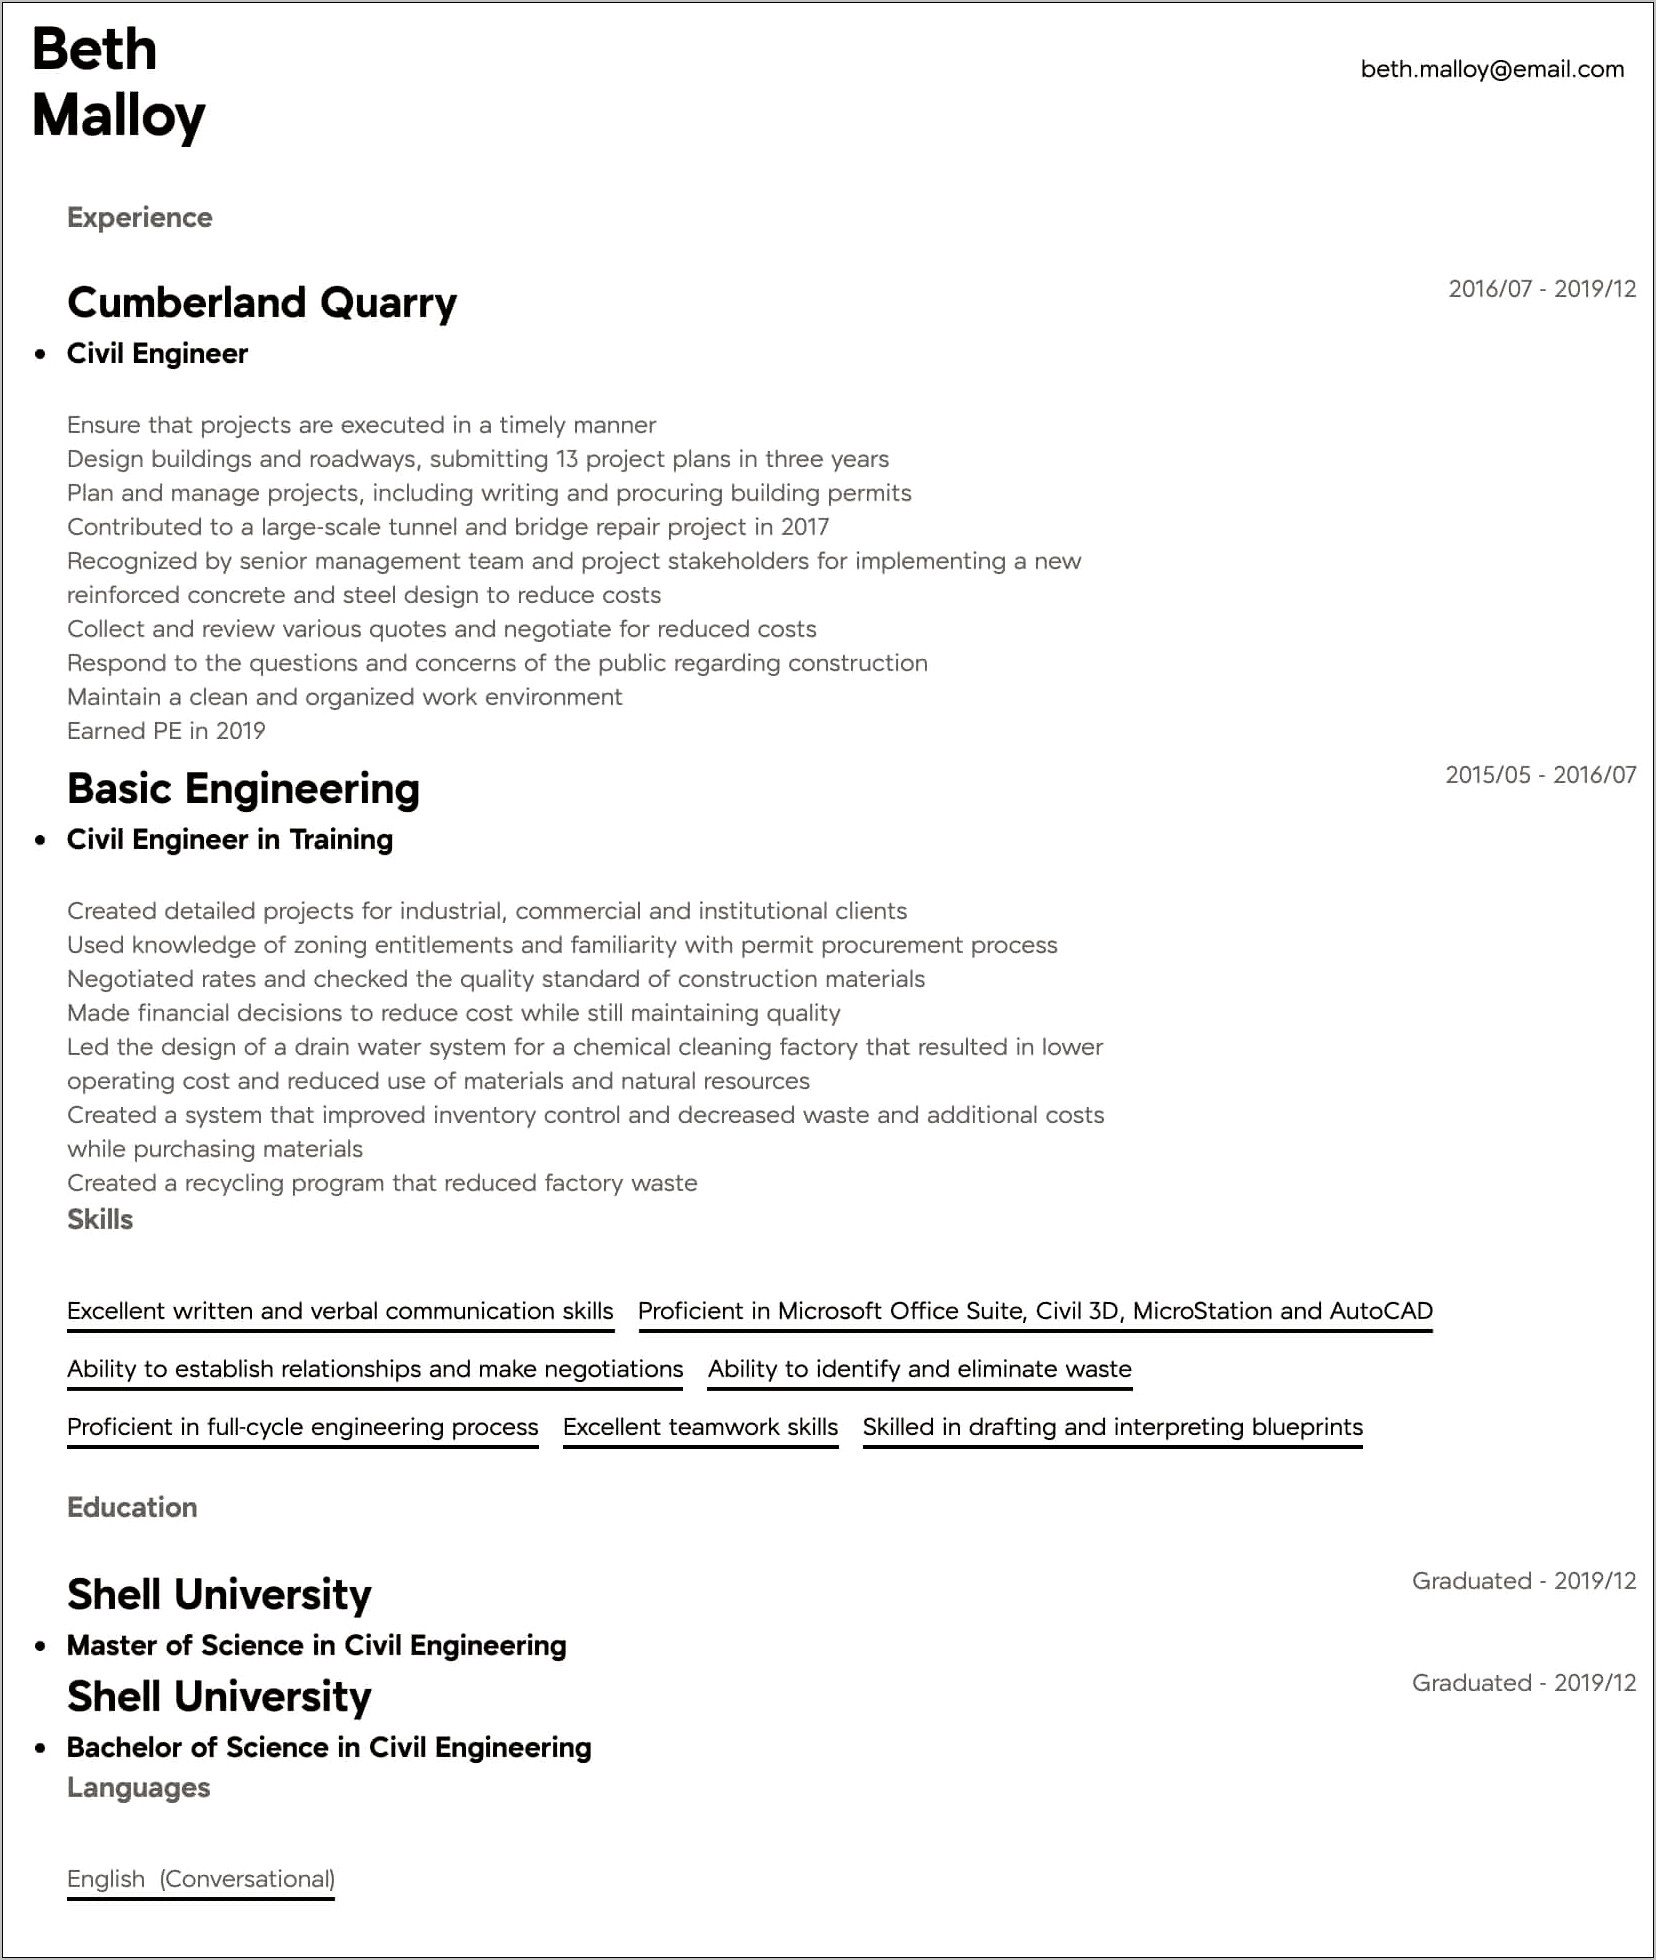 Resume Samples Skills And Experience